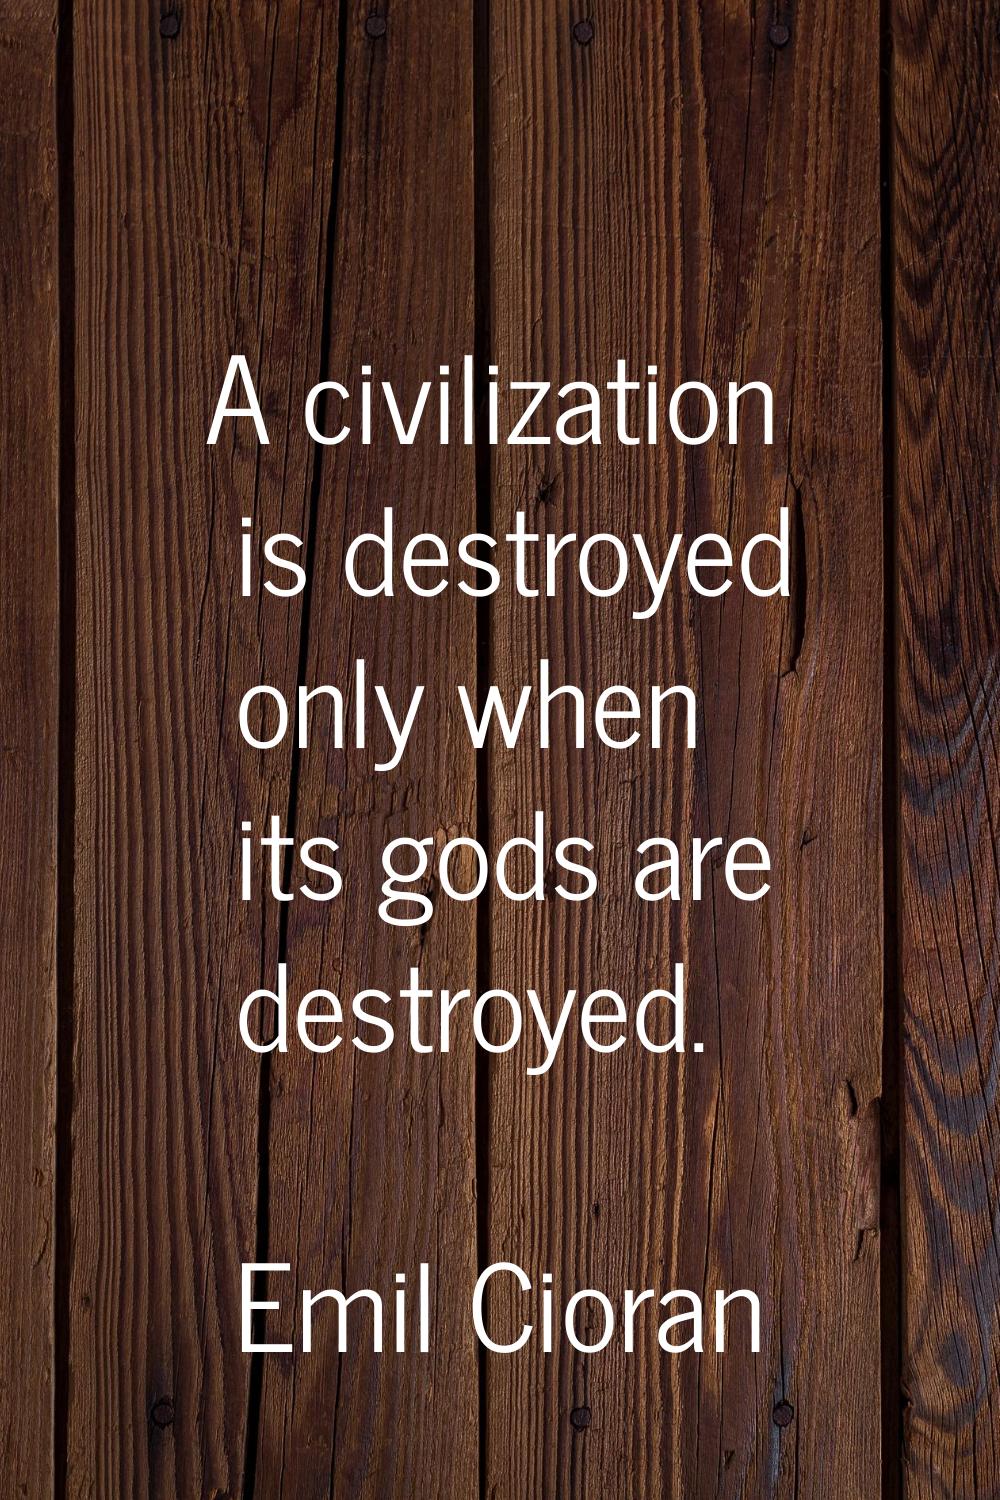 A civilization is destroyed only when its gods are destroyed.